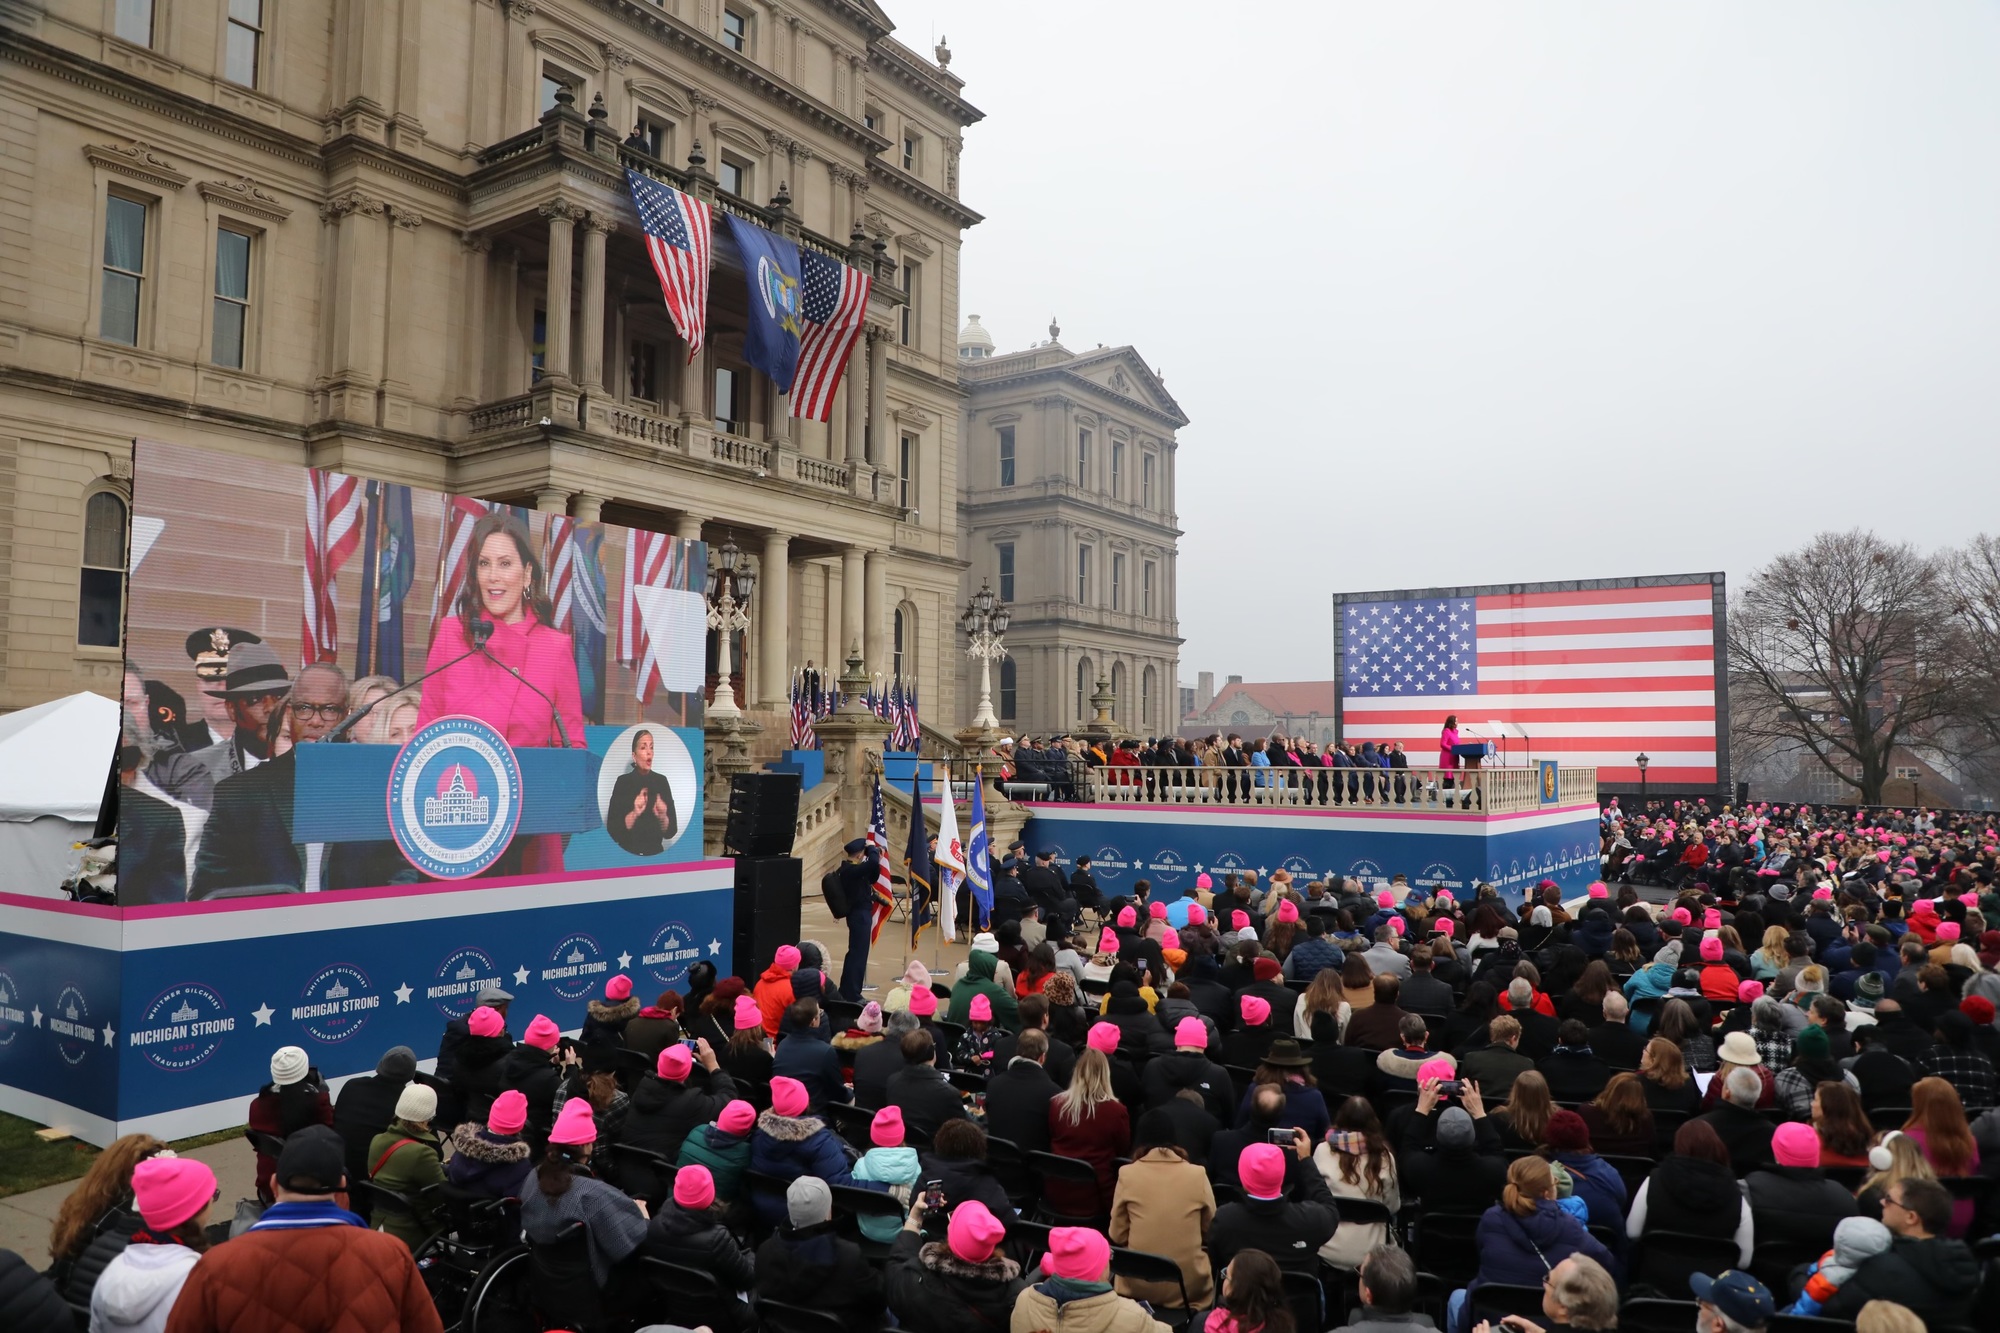 Crowd and stage at the inauguration ceremony